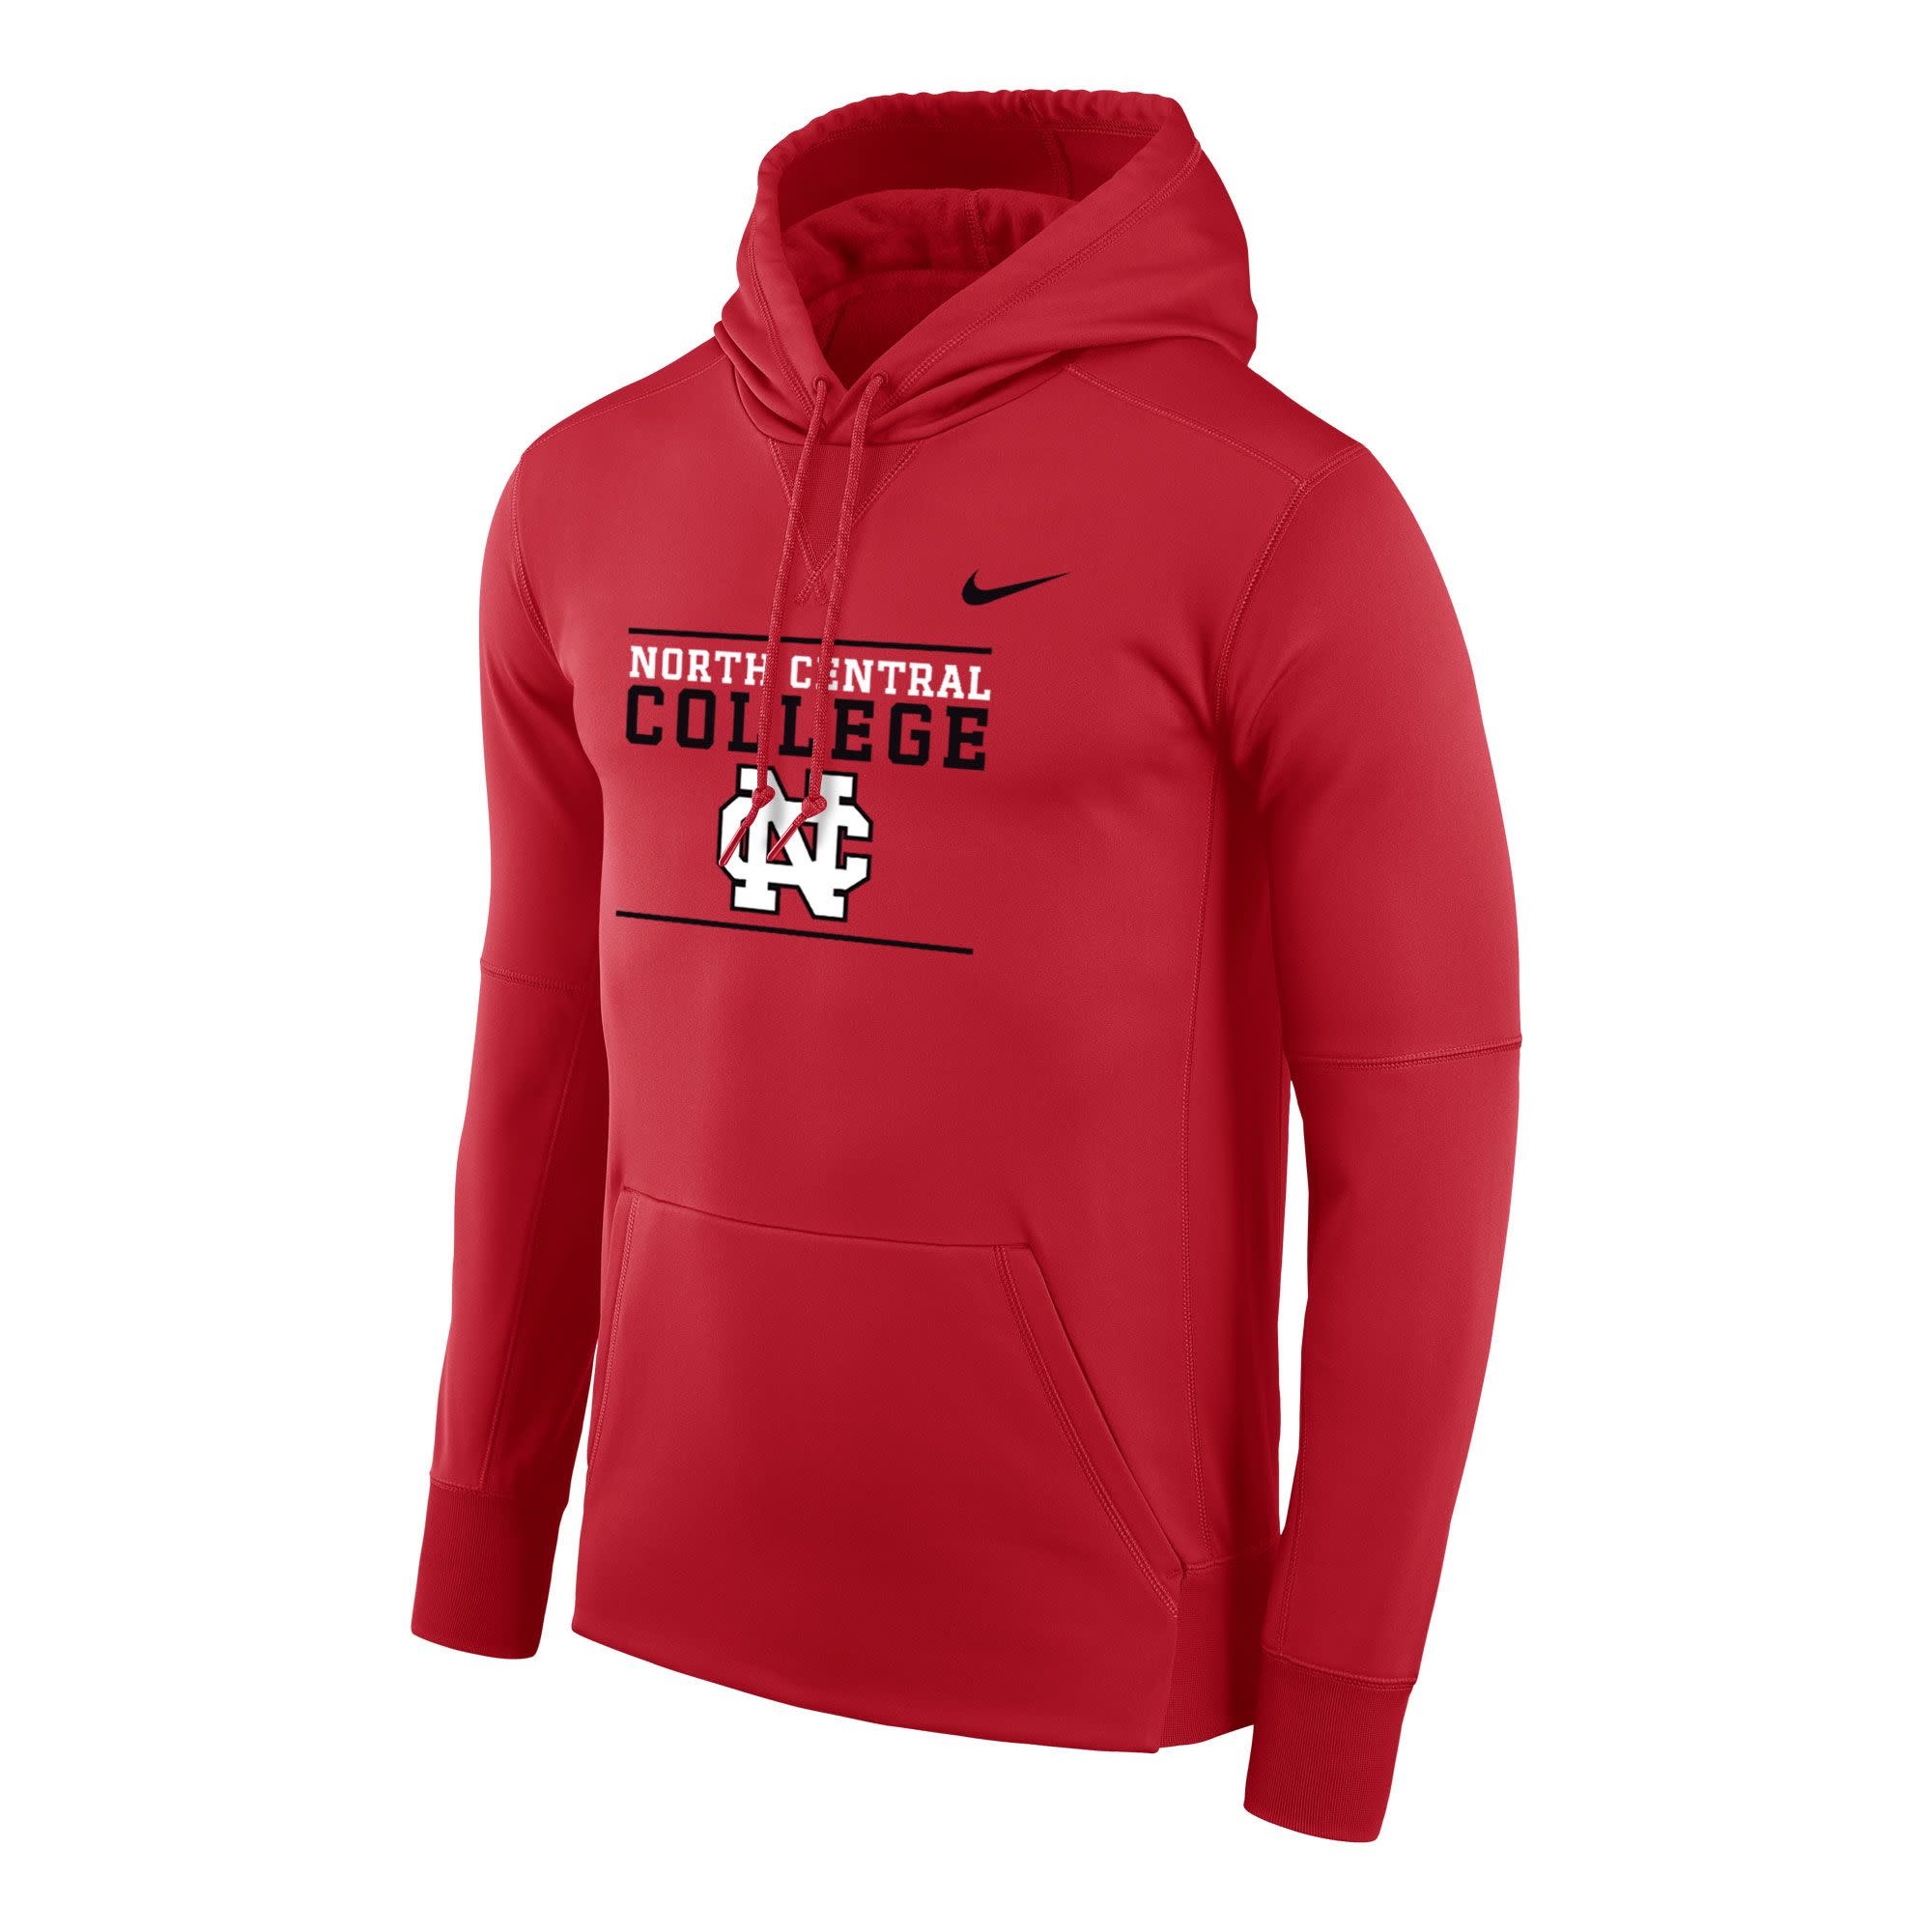 Nike Therma PO Hoodie Fall 22 - North Central College Campus Store